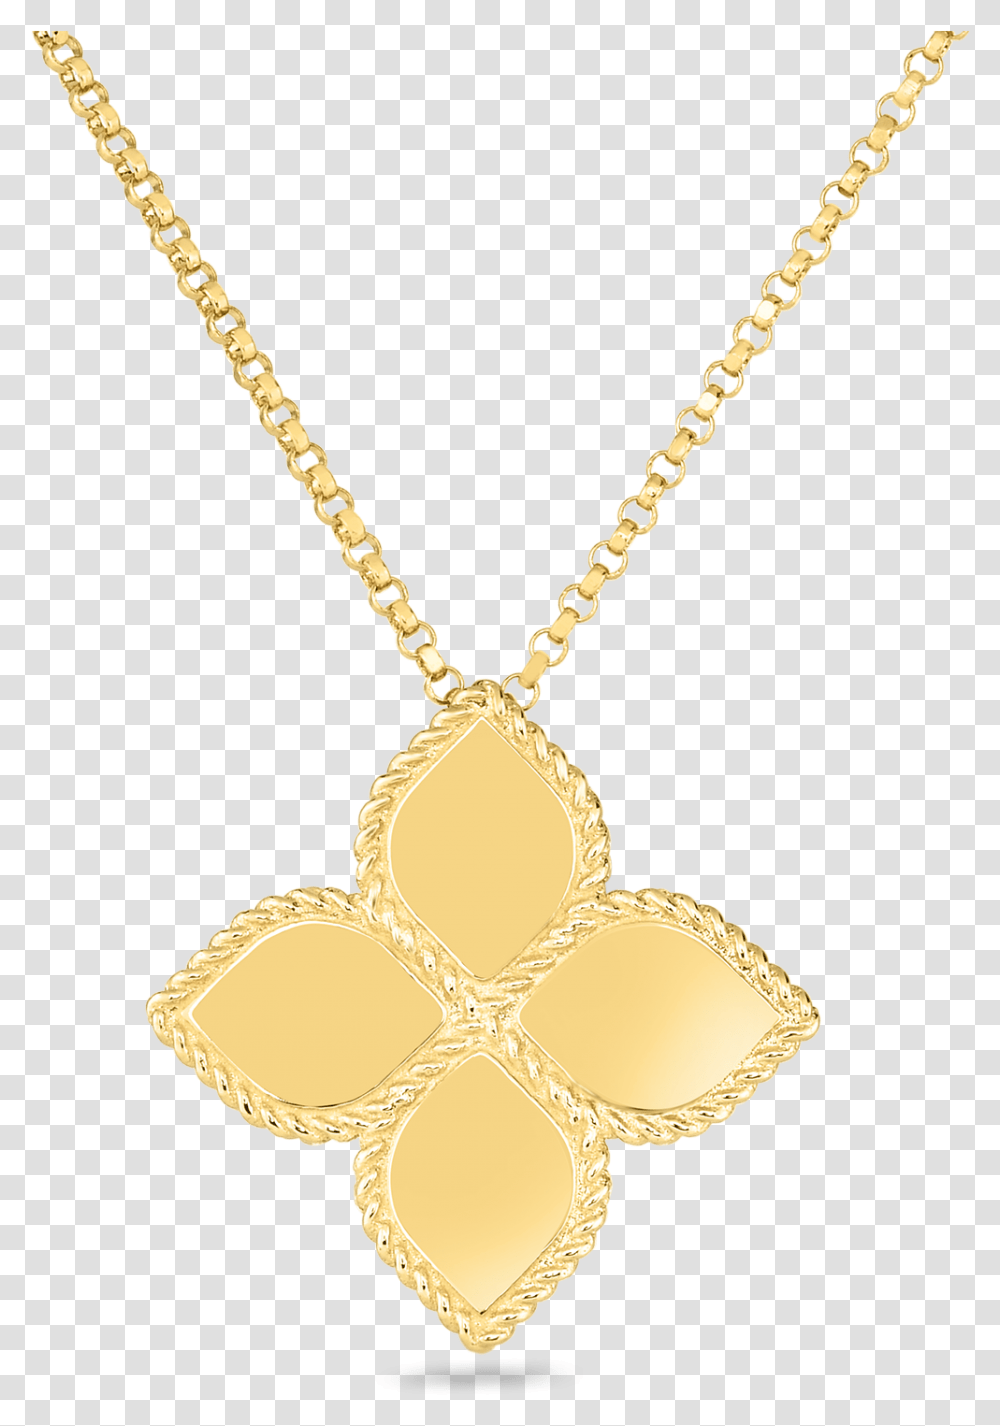 Https Warejewelers Minecraft Red Firework Explosion, Pendant, Locket, Jewelry, Accessories Transparent Png